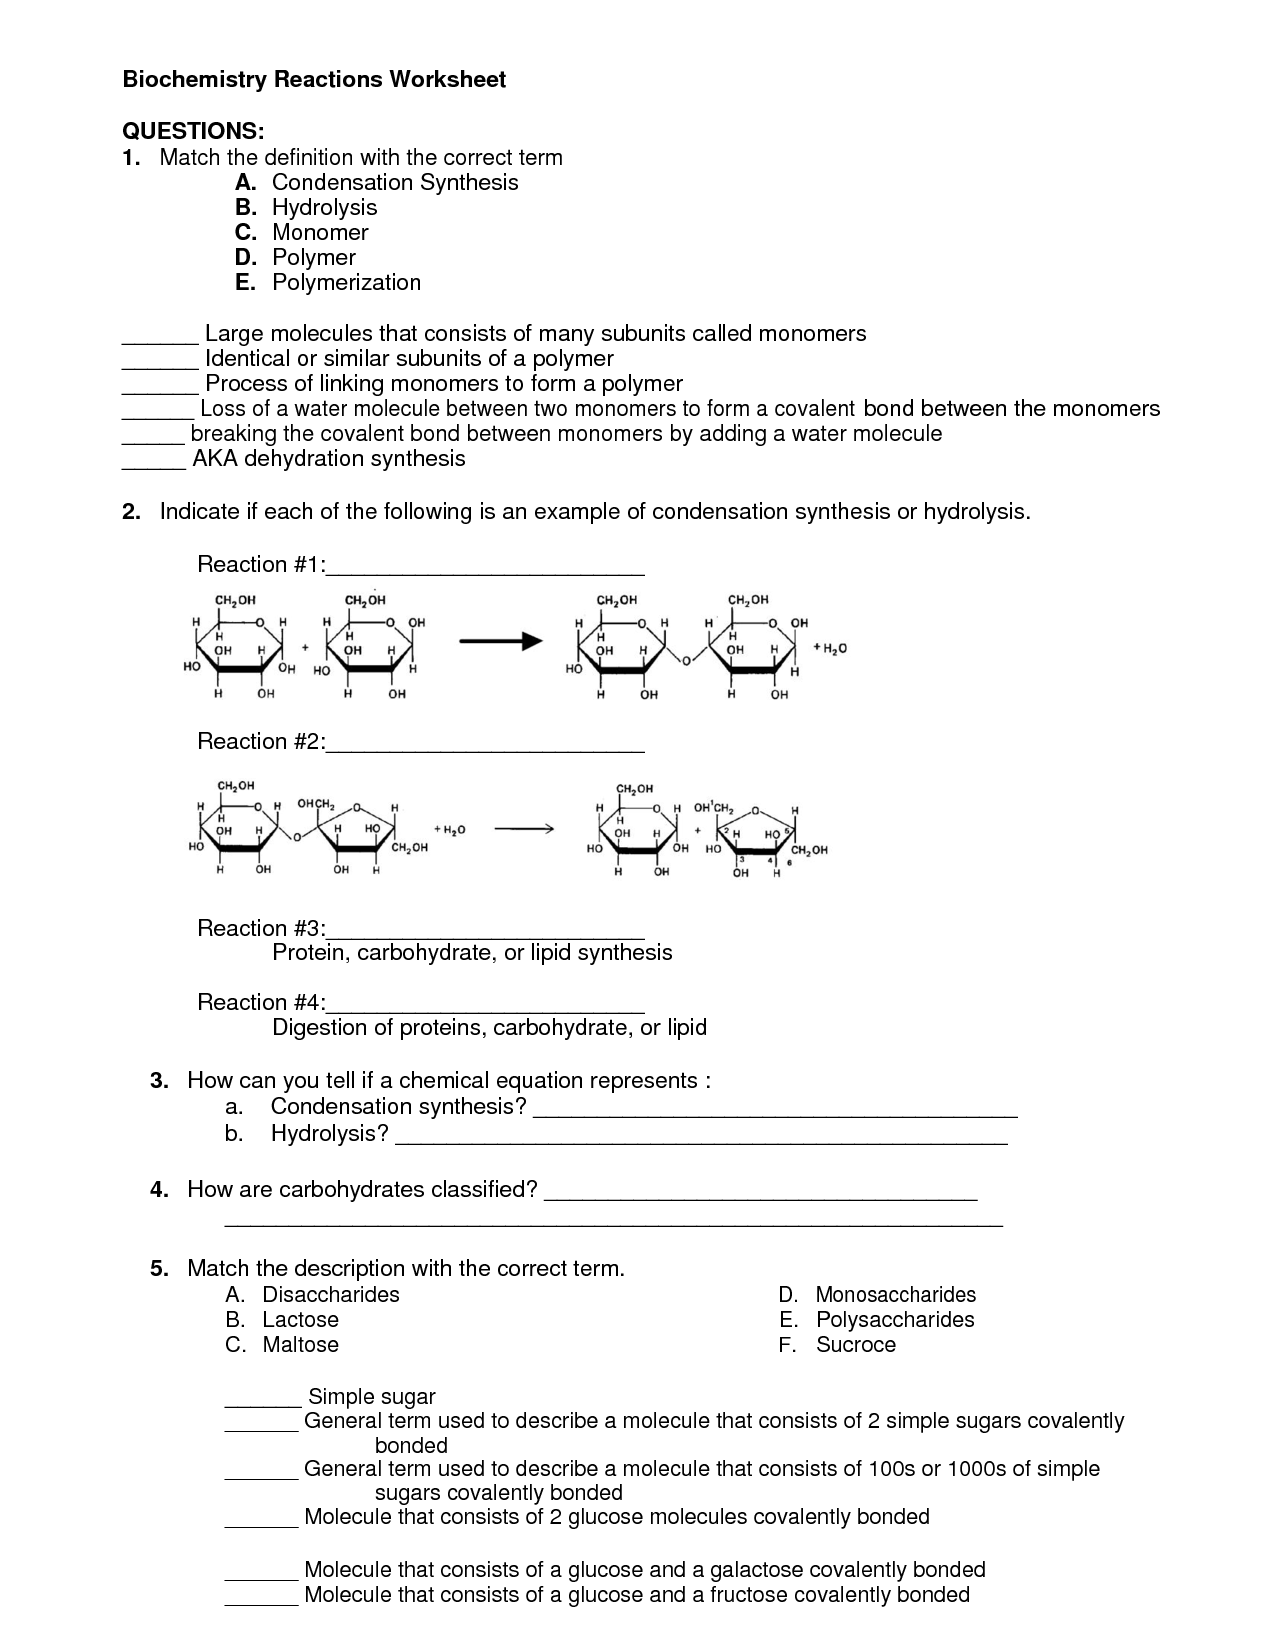 Synthesis Reaction Worksheet Image